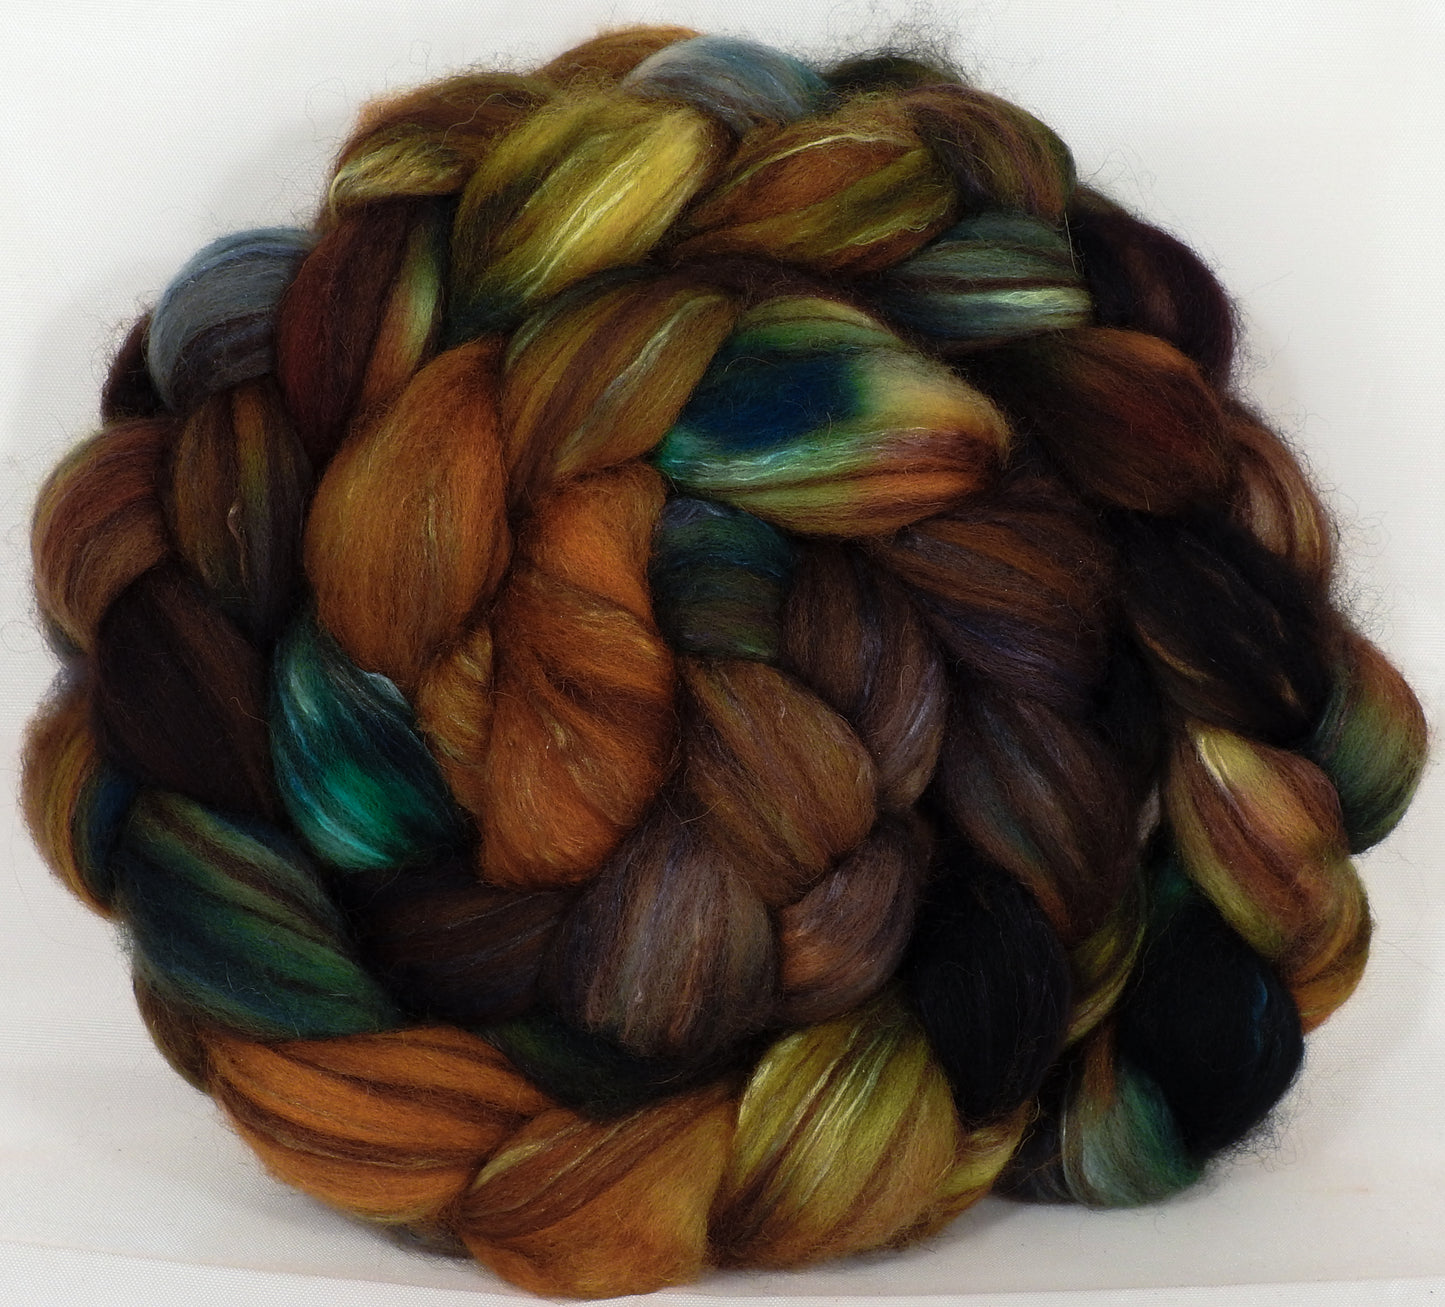 Hand dyed top for spinning -Fossil- (4.6 oz.) 18.5 mic merino/ camel/ brown alpaca/ mulberry silk/ (40/20/20/20) - Inglenook Fibers